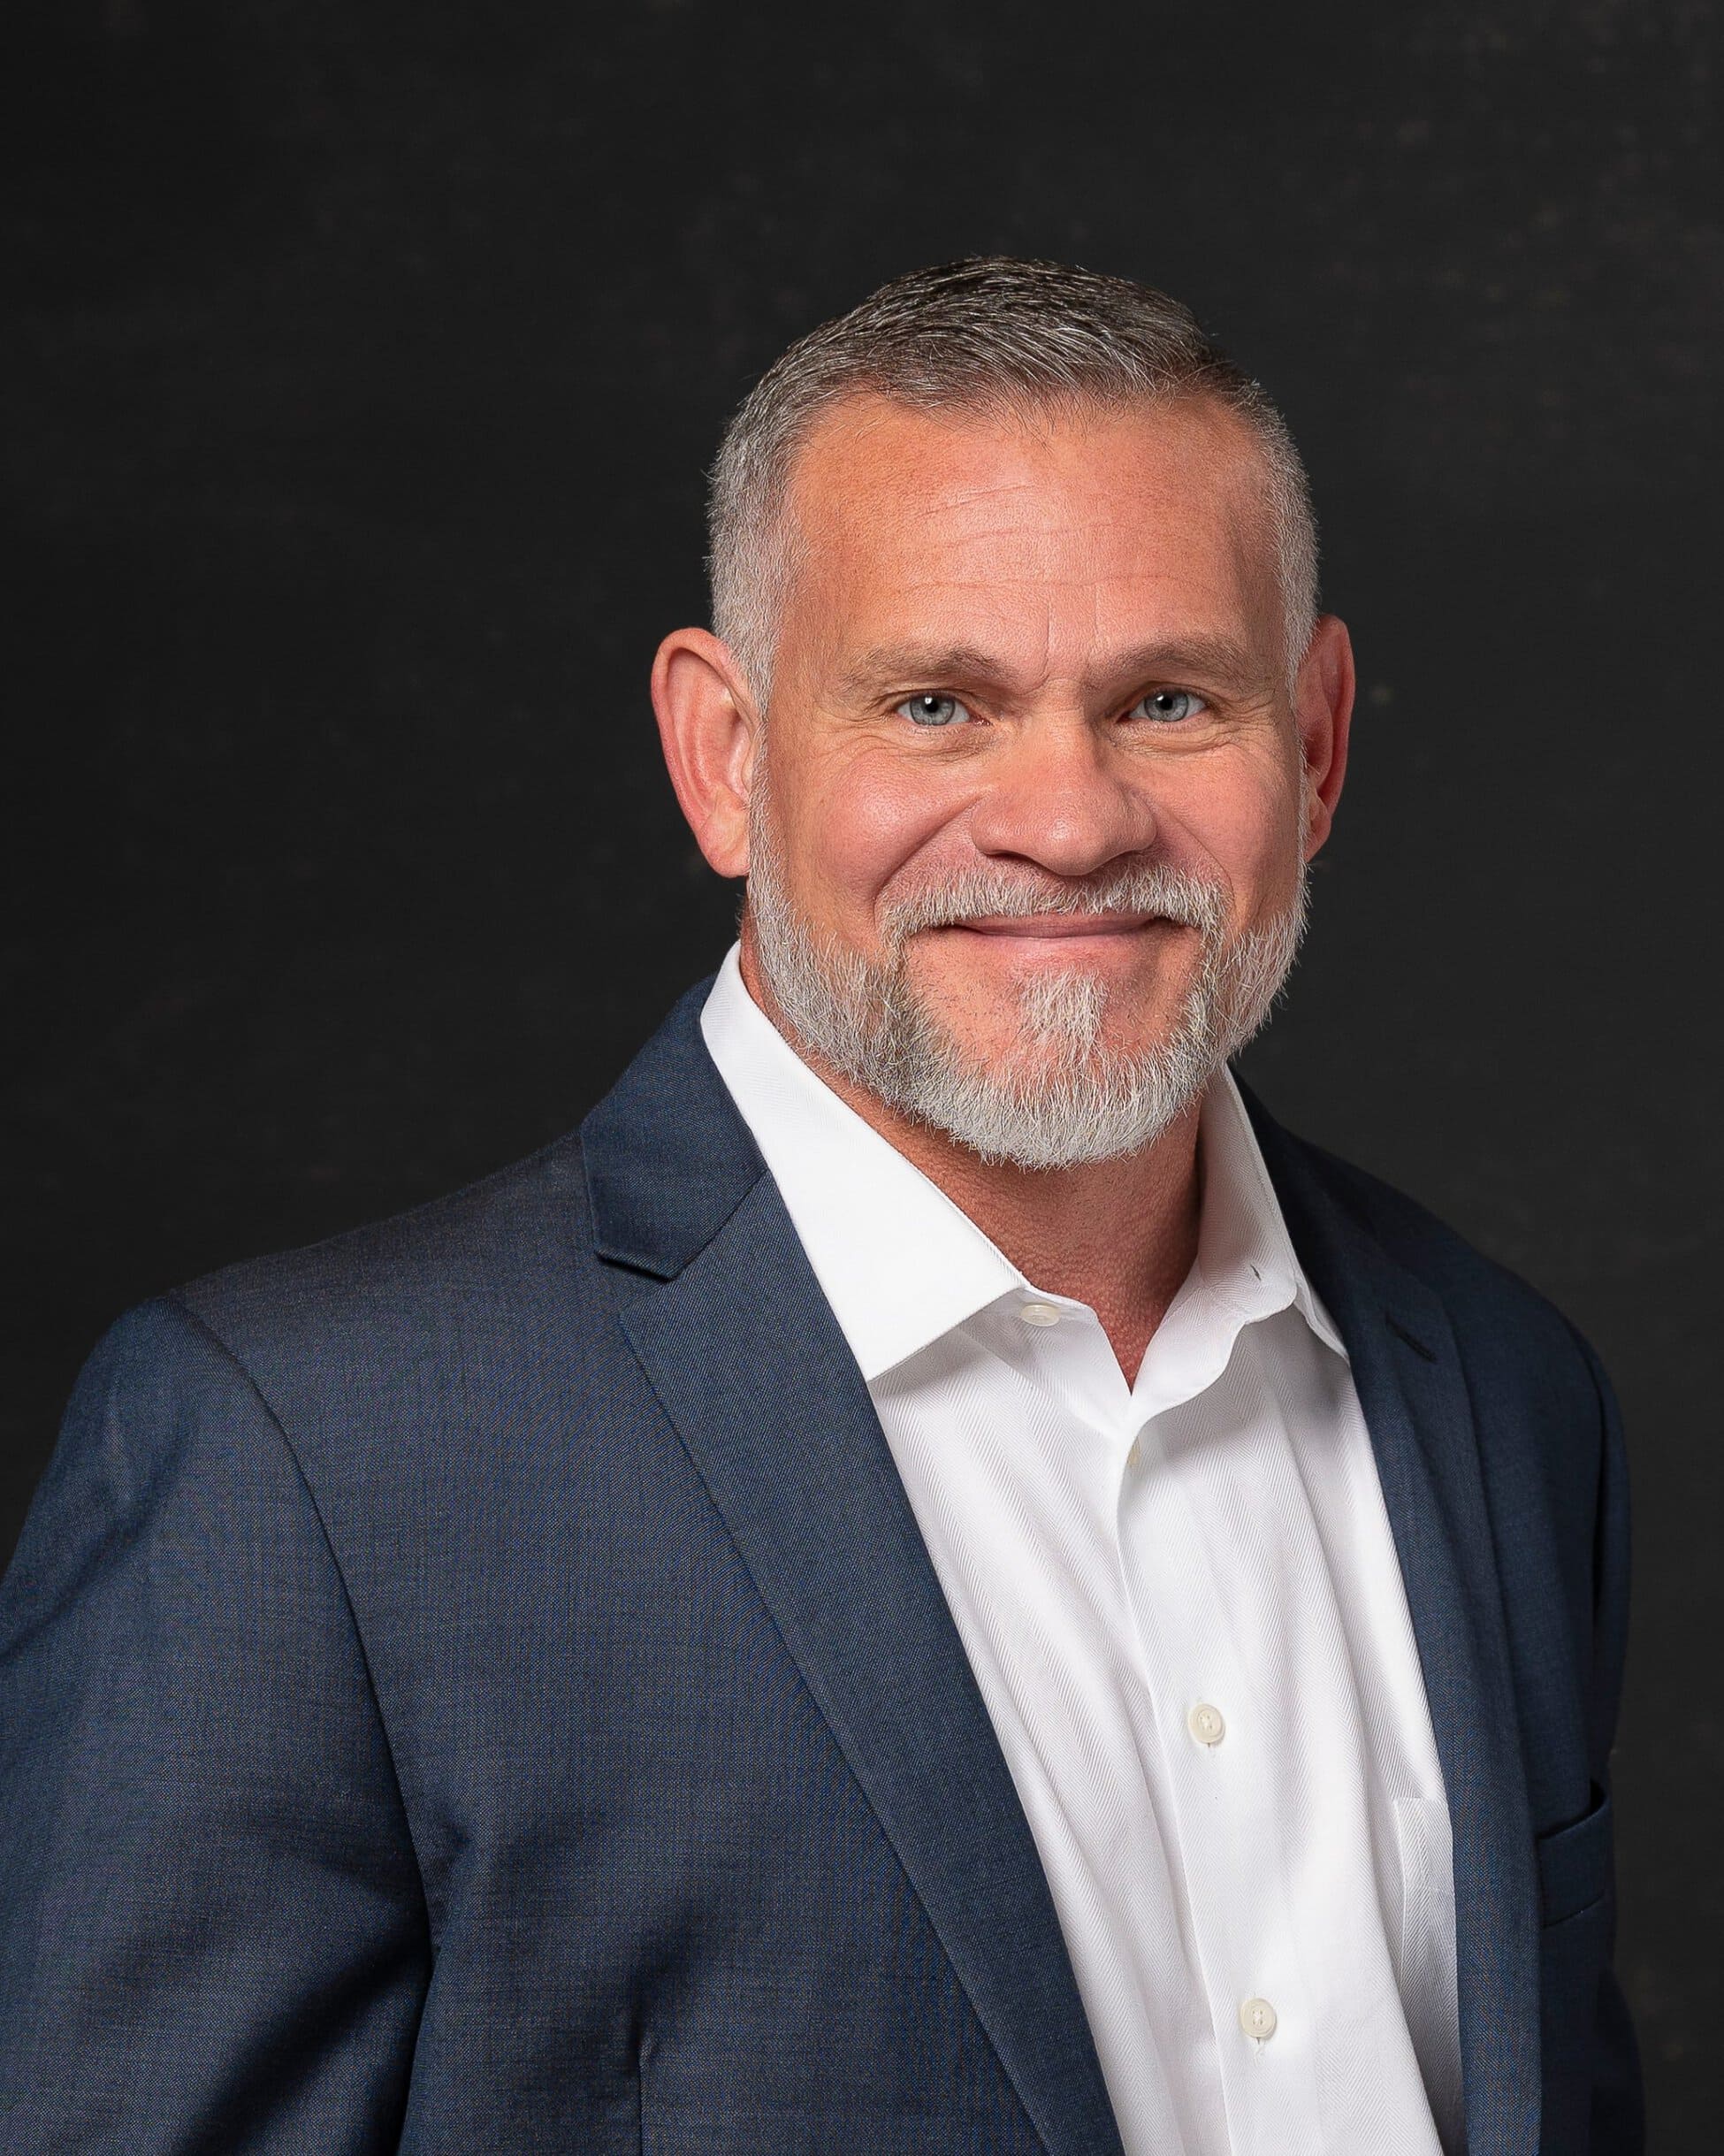 Construction industry executive with a grey beard, grey hair and bright blue eyes smiling while looking at camera for professional headshots. Wearing an open-collar white dress shirt and dark blue jacket. Shot under studio lighting and set against a dark grey backdrop. 